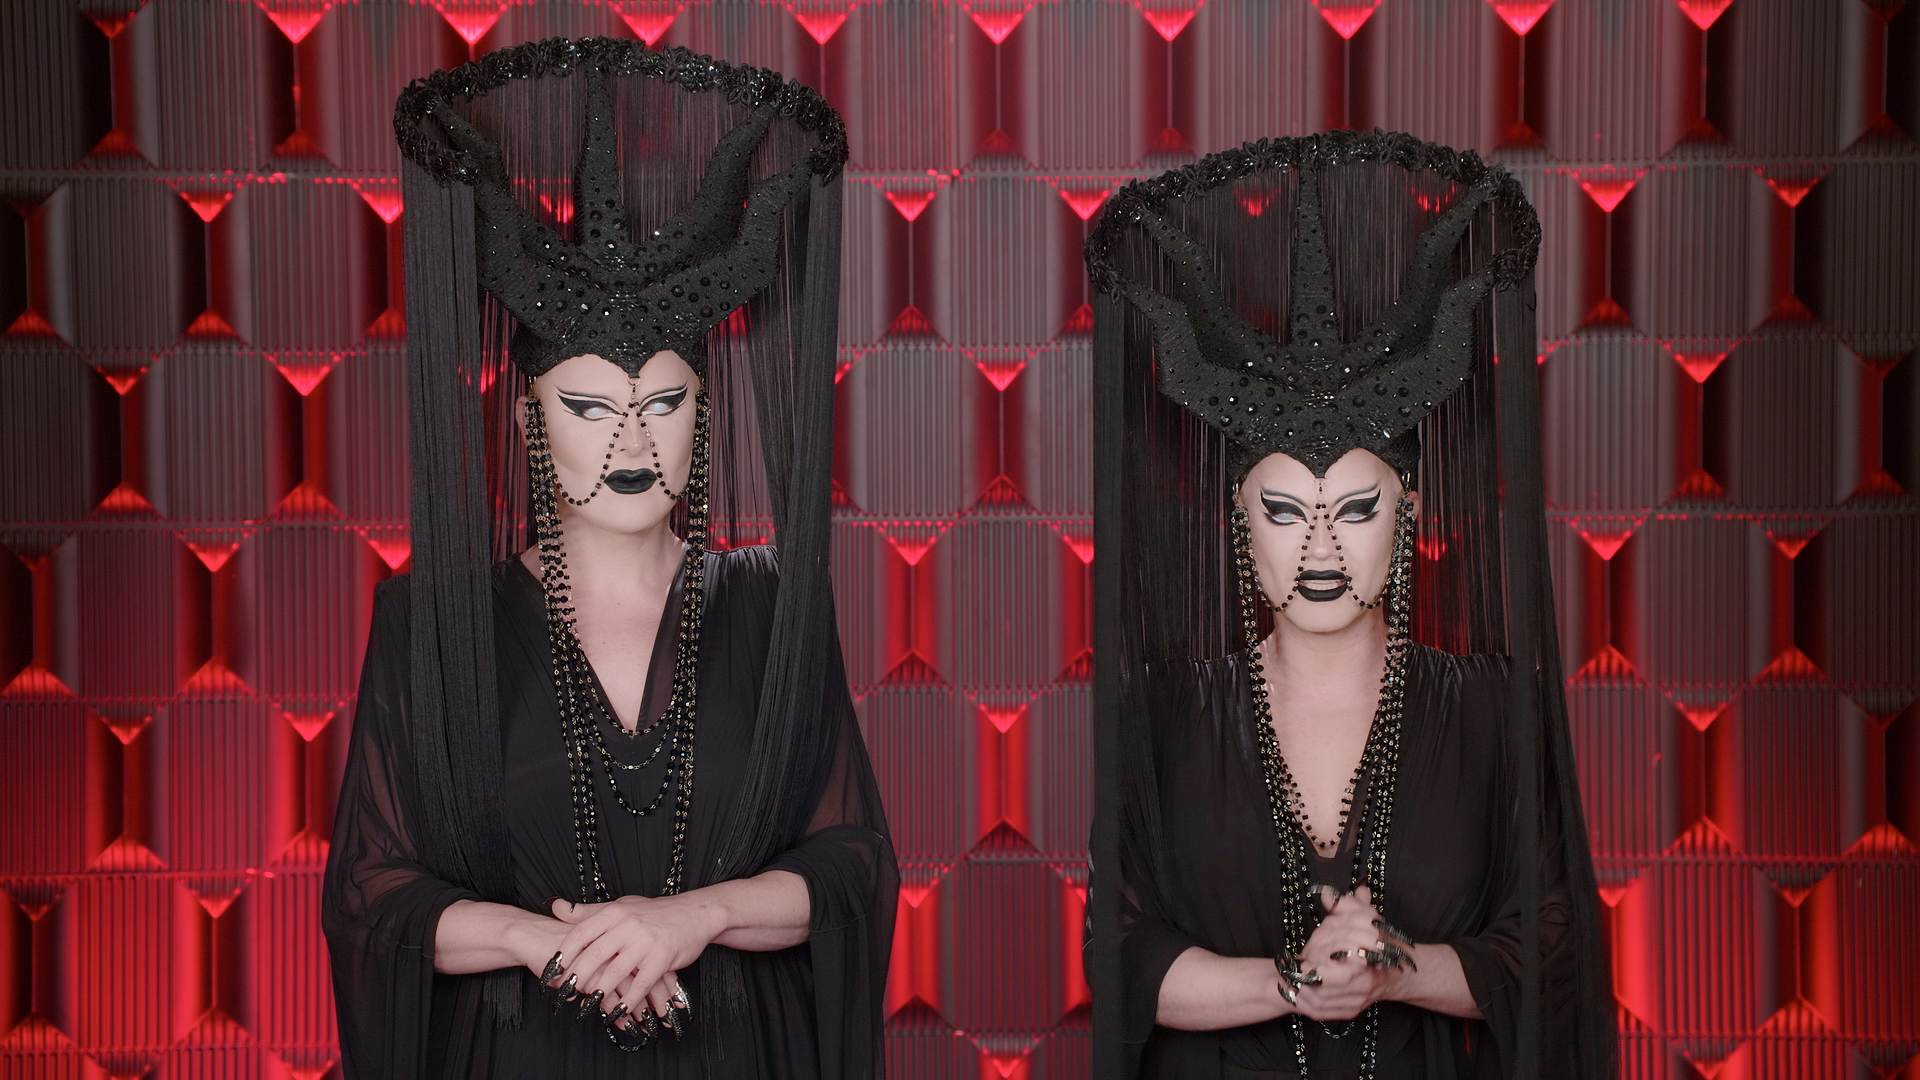 The Grand Finale, The Boulet Brothers crown the world's next Drag Supermonster, TV-MA, Season 1064748, Episode 10